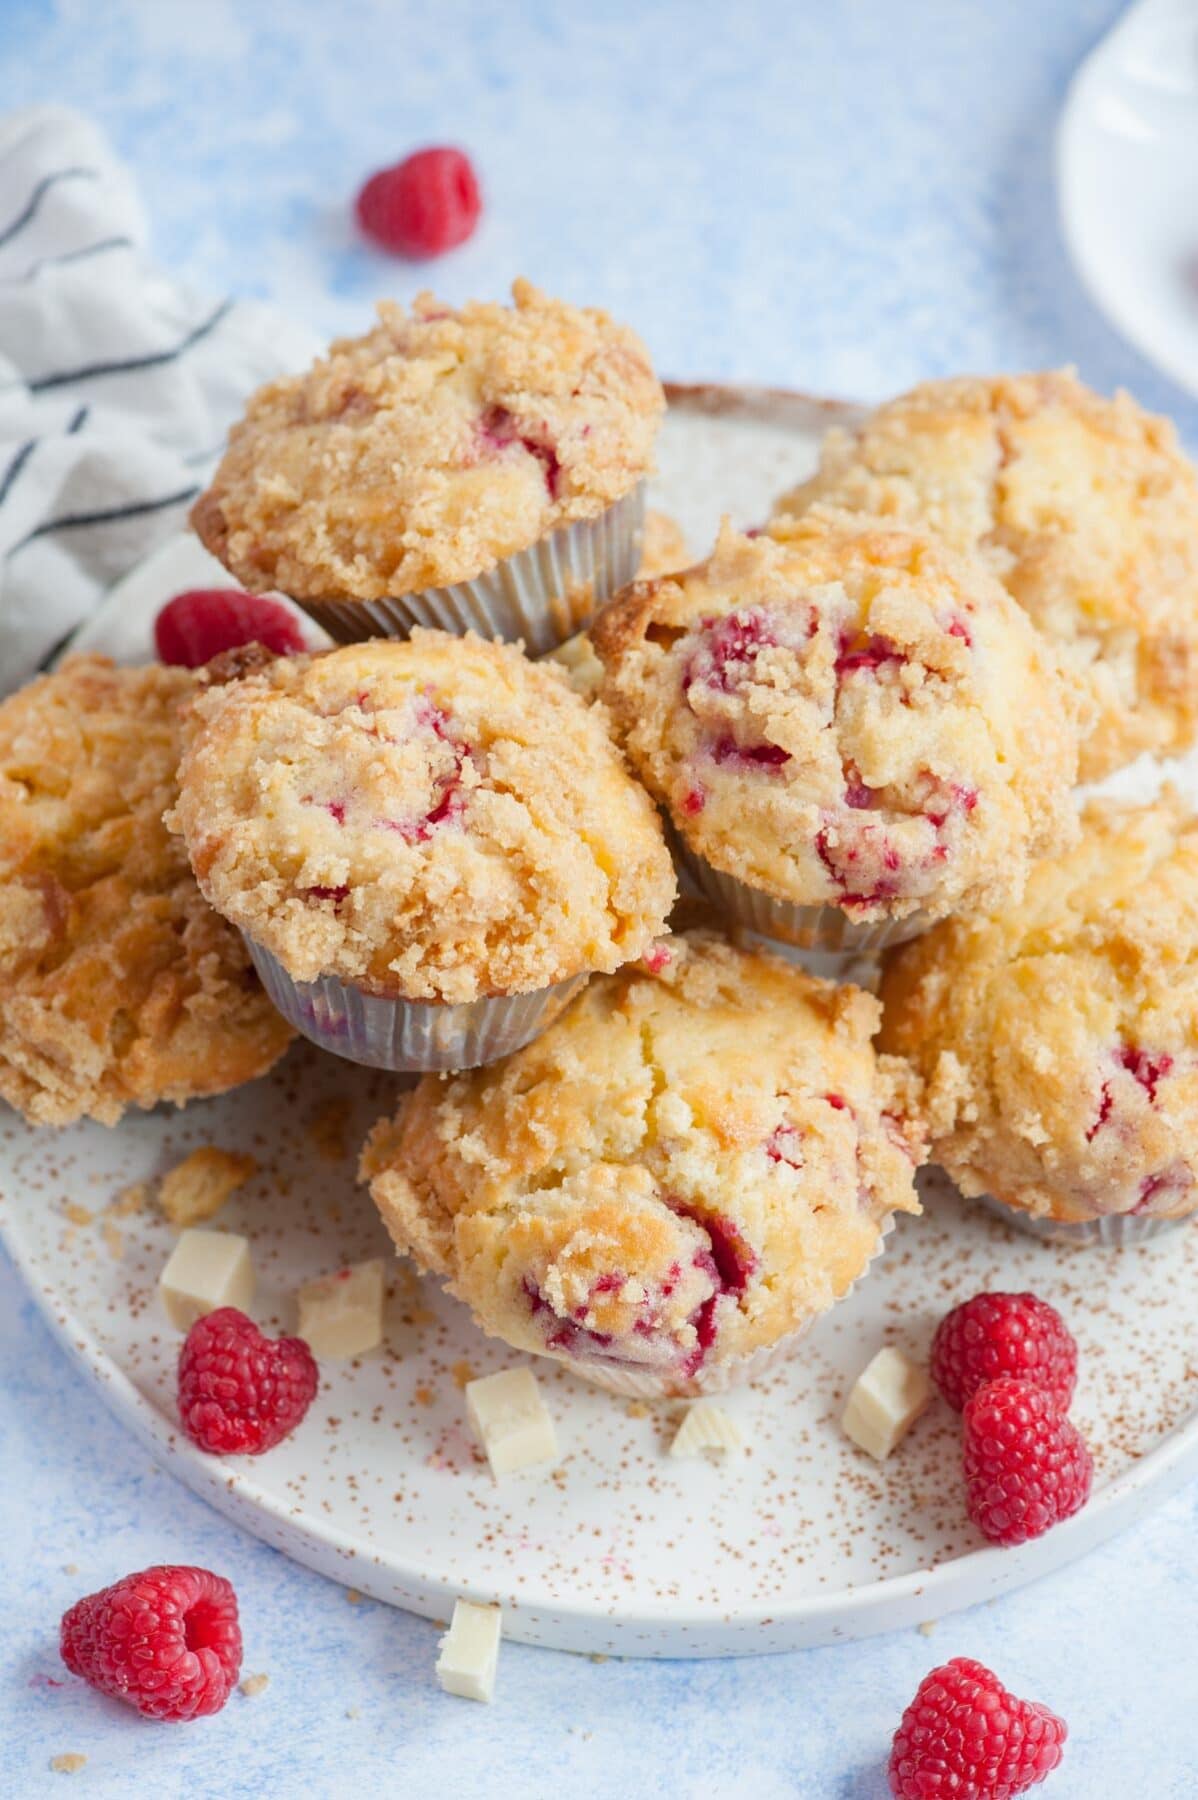 Raspberry muffins on a white plate. Raspberries and white chocolate chunks scattered around.